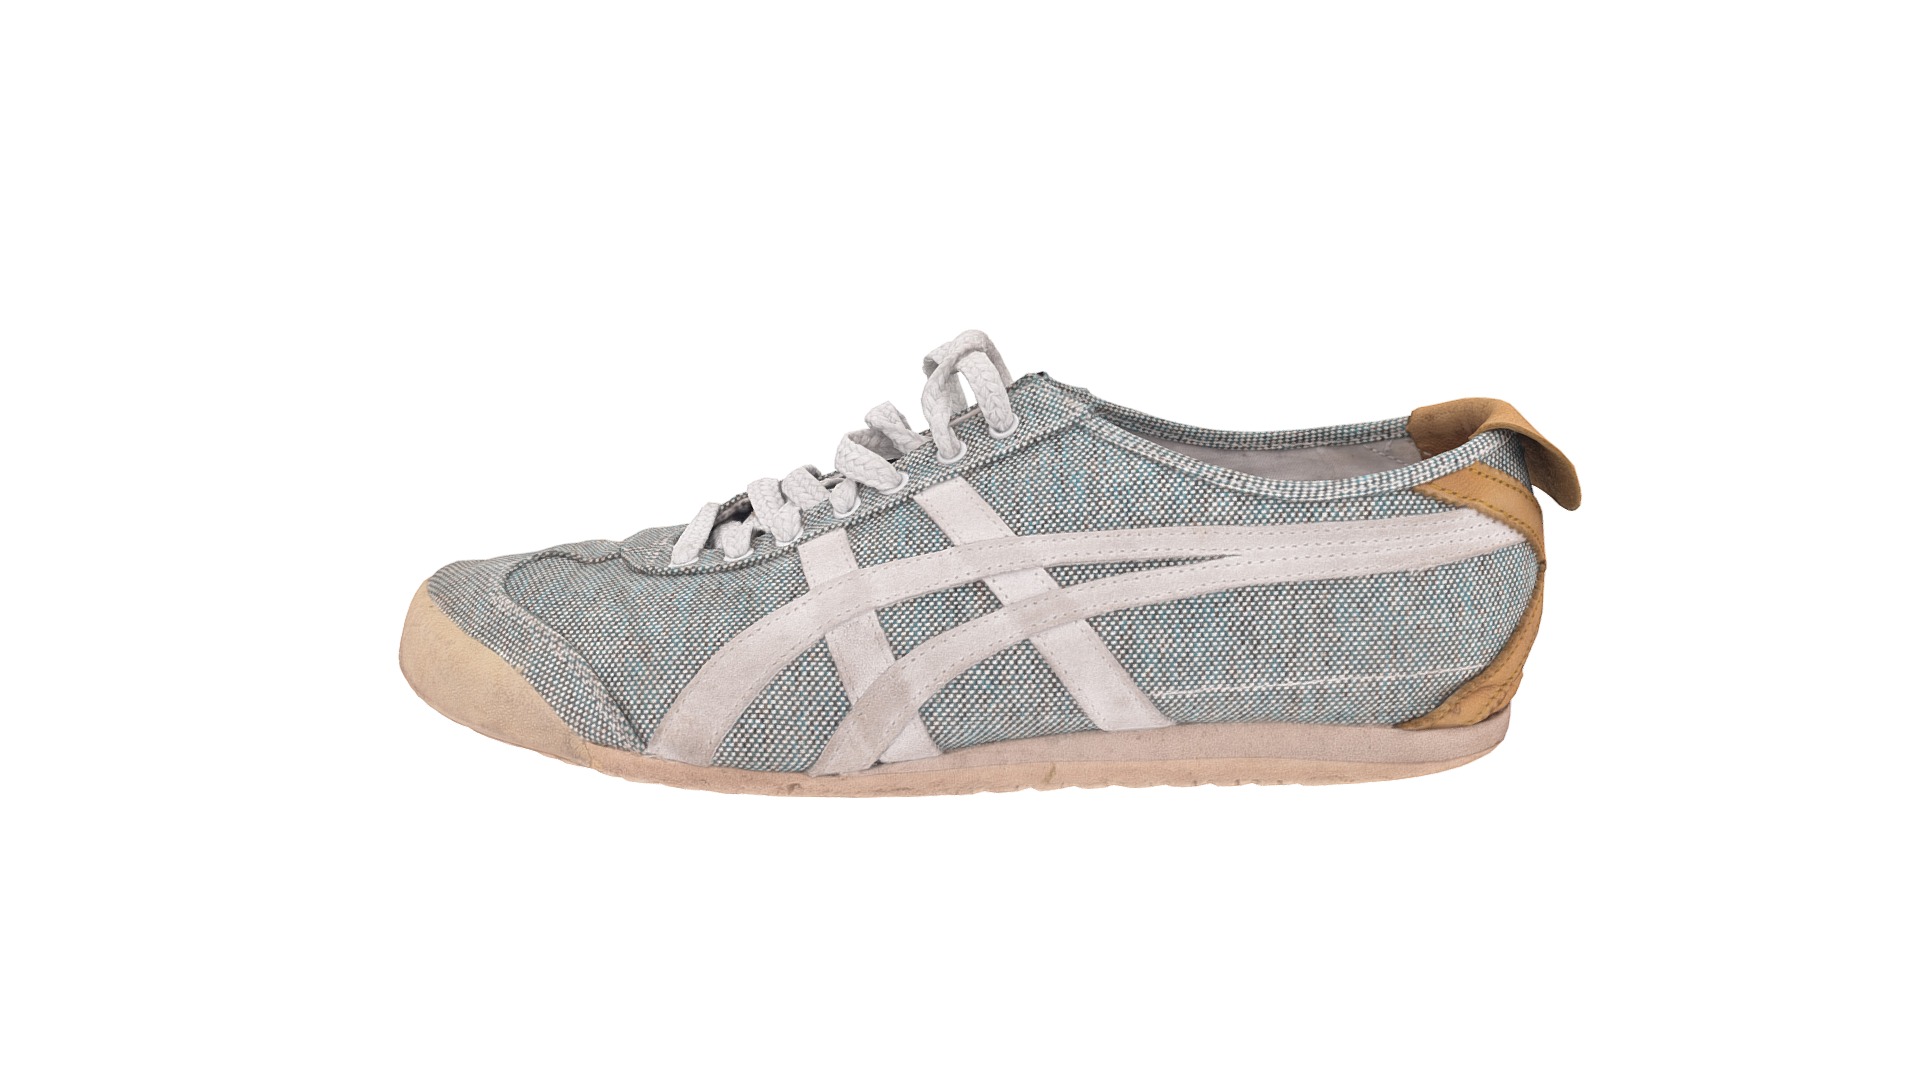 3D model Onitsuka Tiger - This is a 3D model of the Onitsuka Tiger. The 3D model is about a close-up of a shoe.